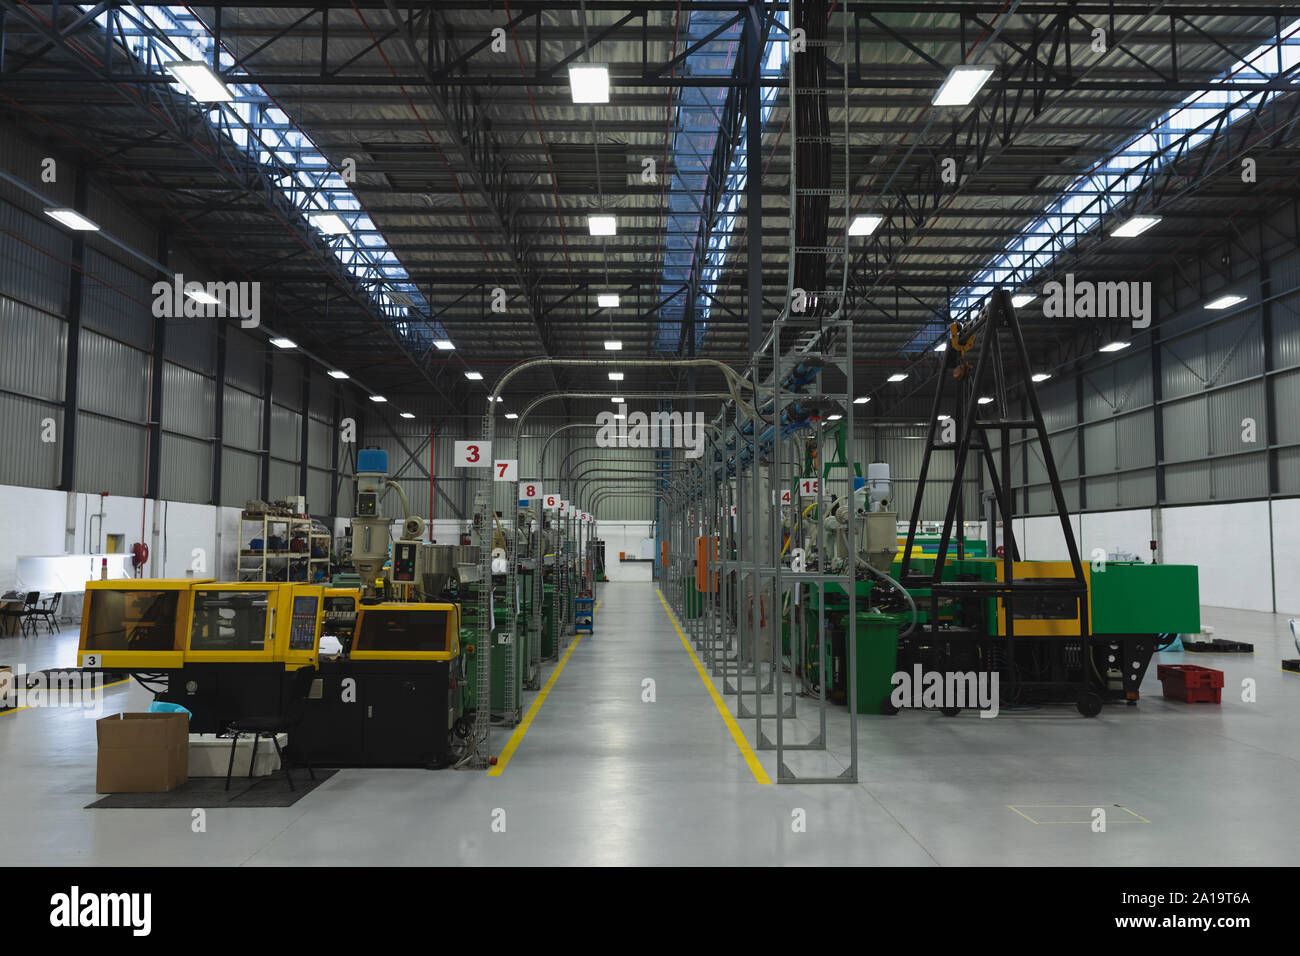 Machinery in a factory warehouse building Stock Photo